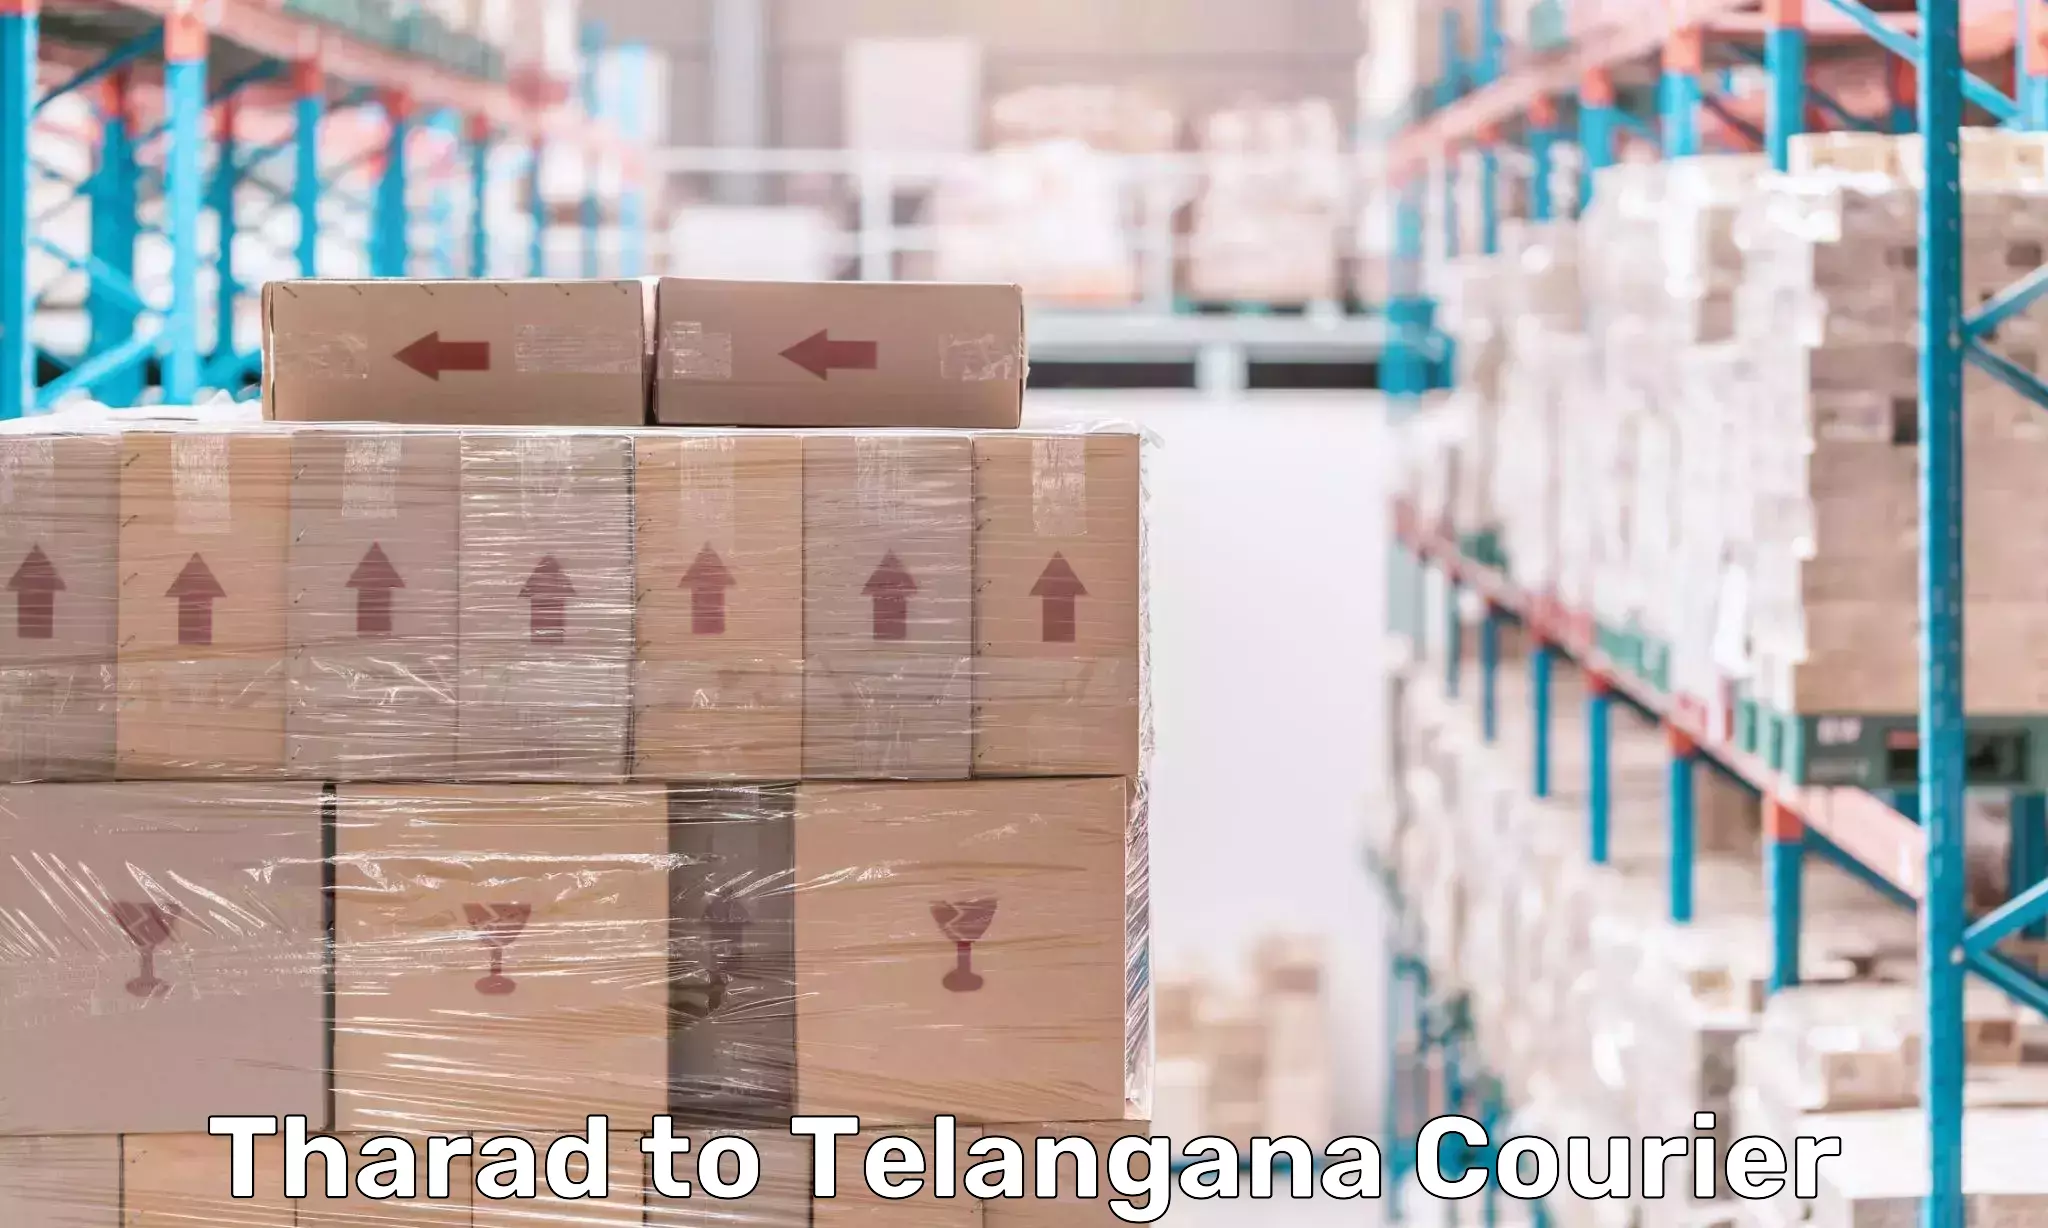 Tech-enabled shipping in Tharad to Dharmapuri Jagtial